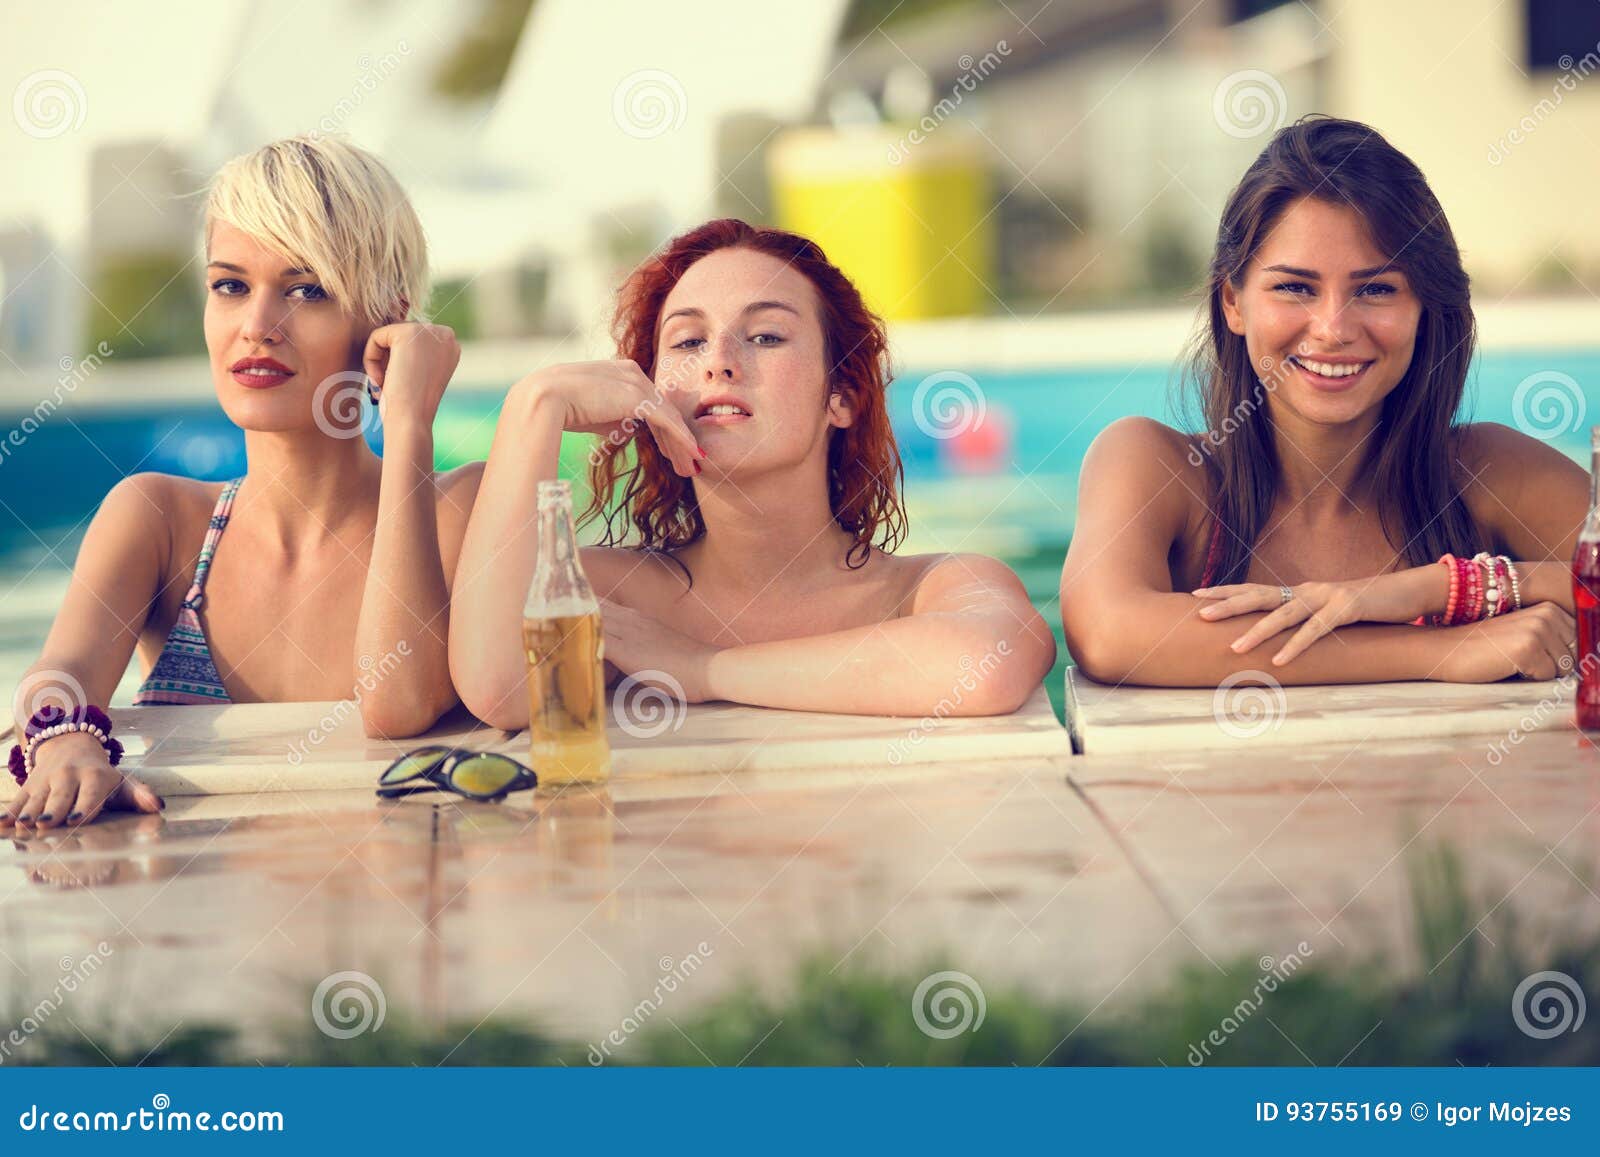 blond, brunette and red haired female bathers posing on edge of